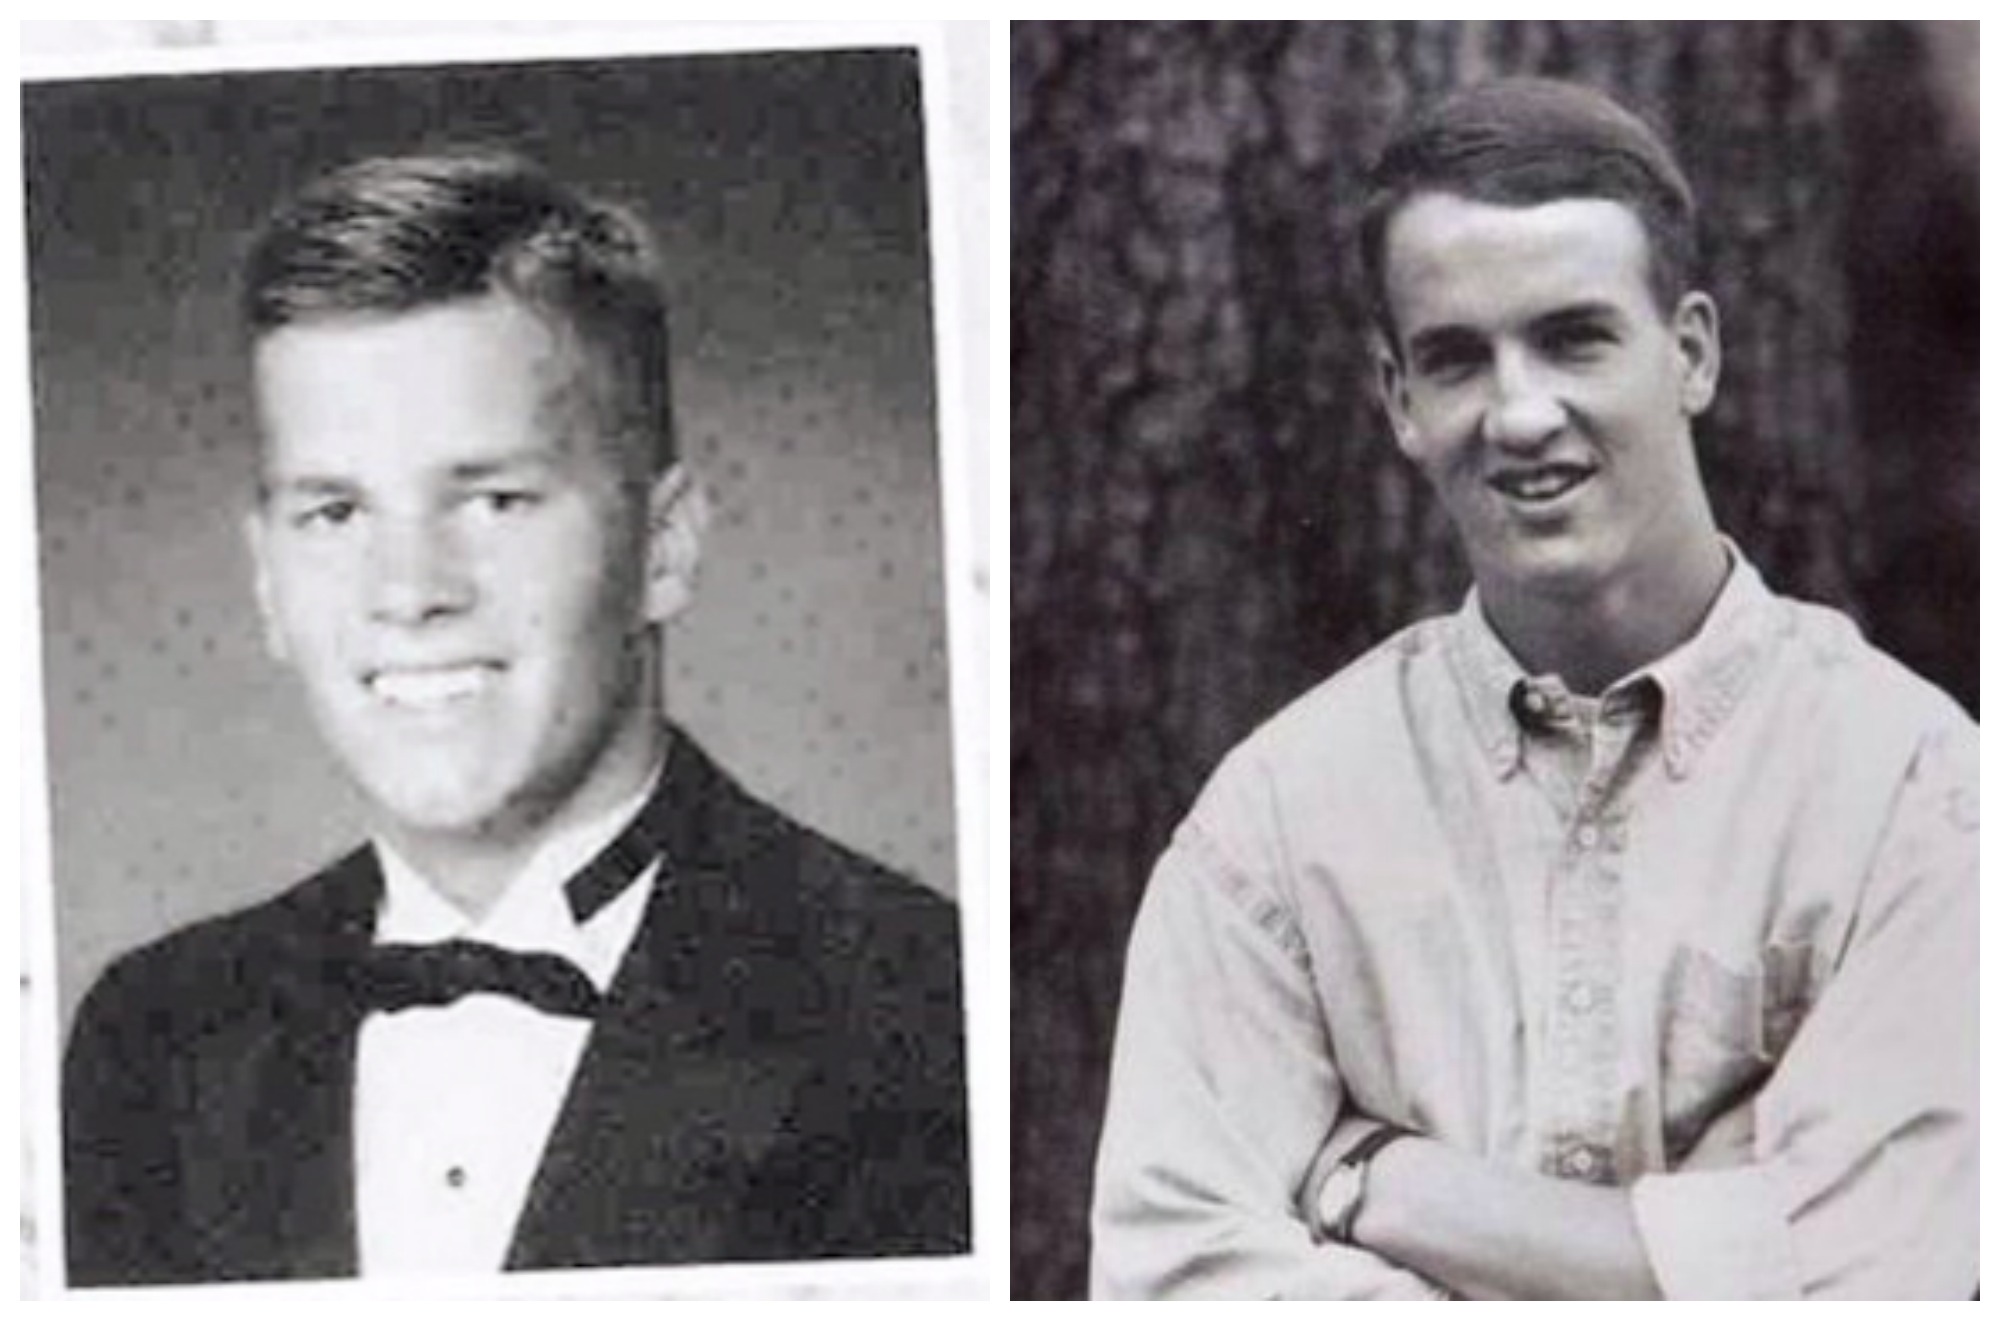 Here's what Tom Brady and Peyton Manning looked like in high